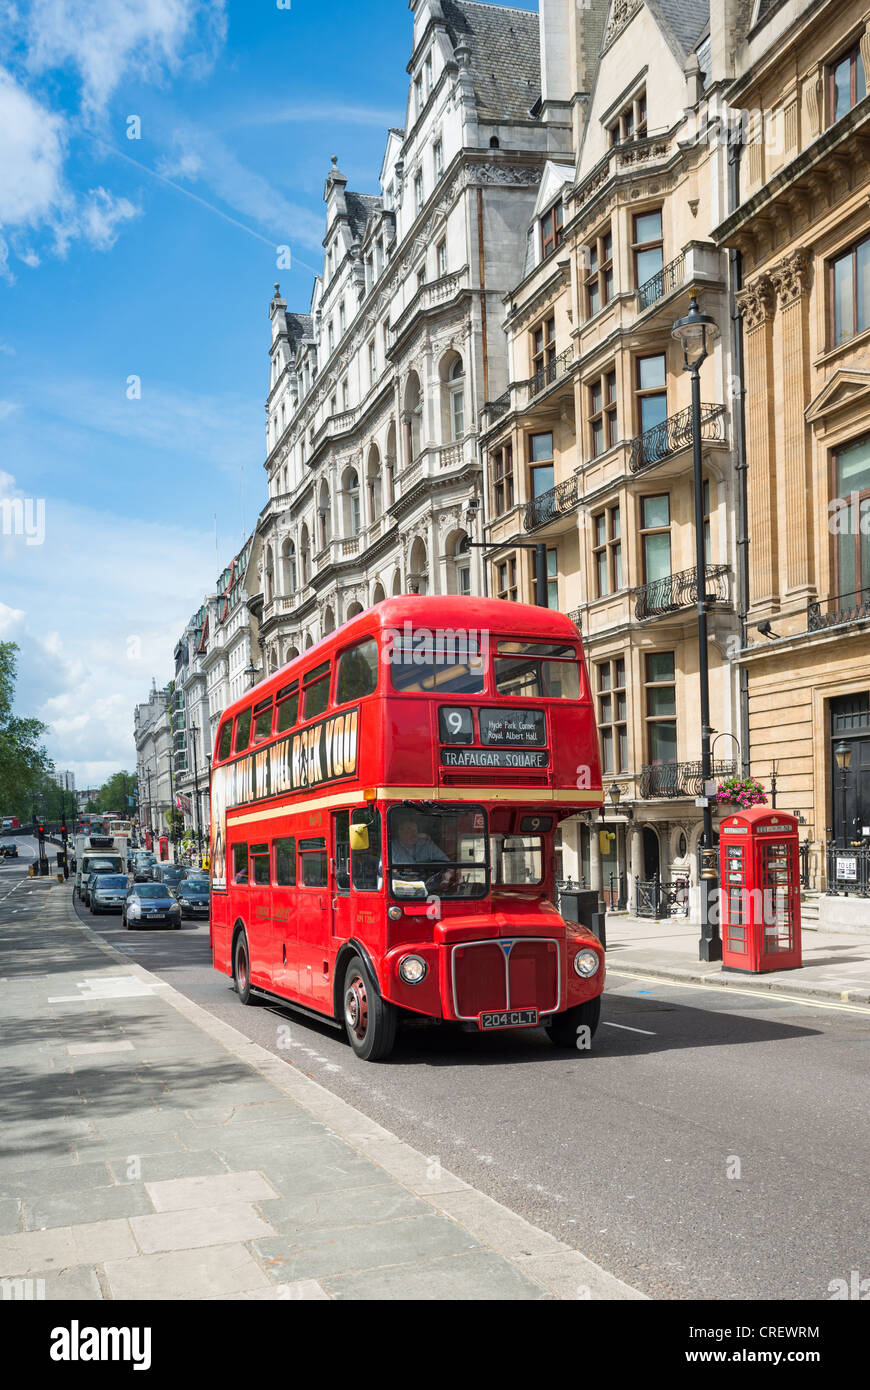 Traditionellen Routemaster Bus am Piccadilly, London, England. Stockfoto